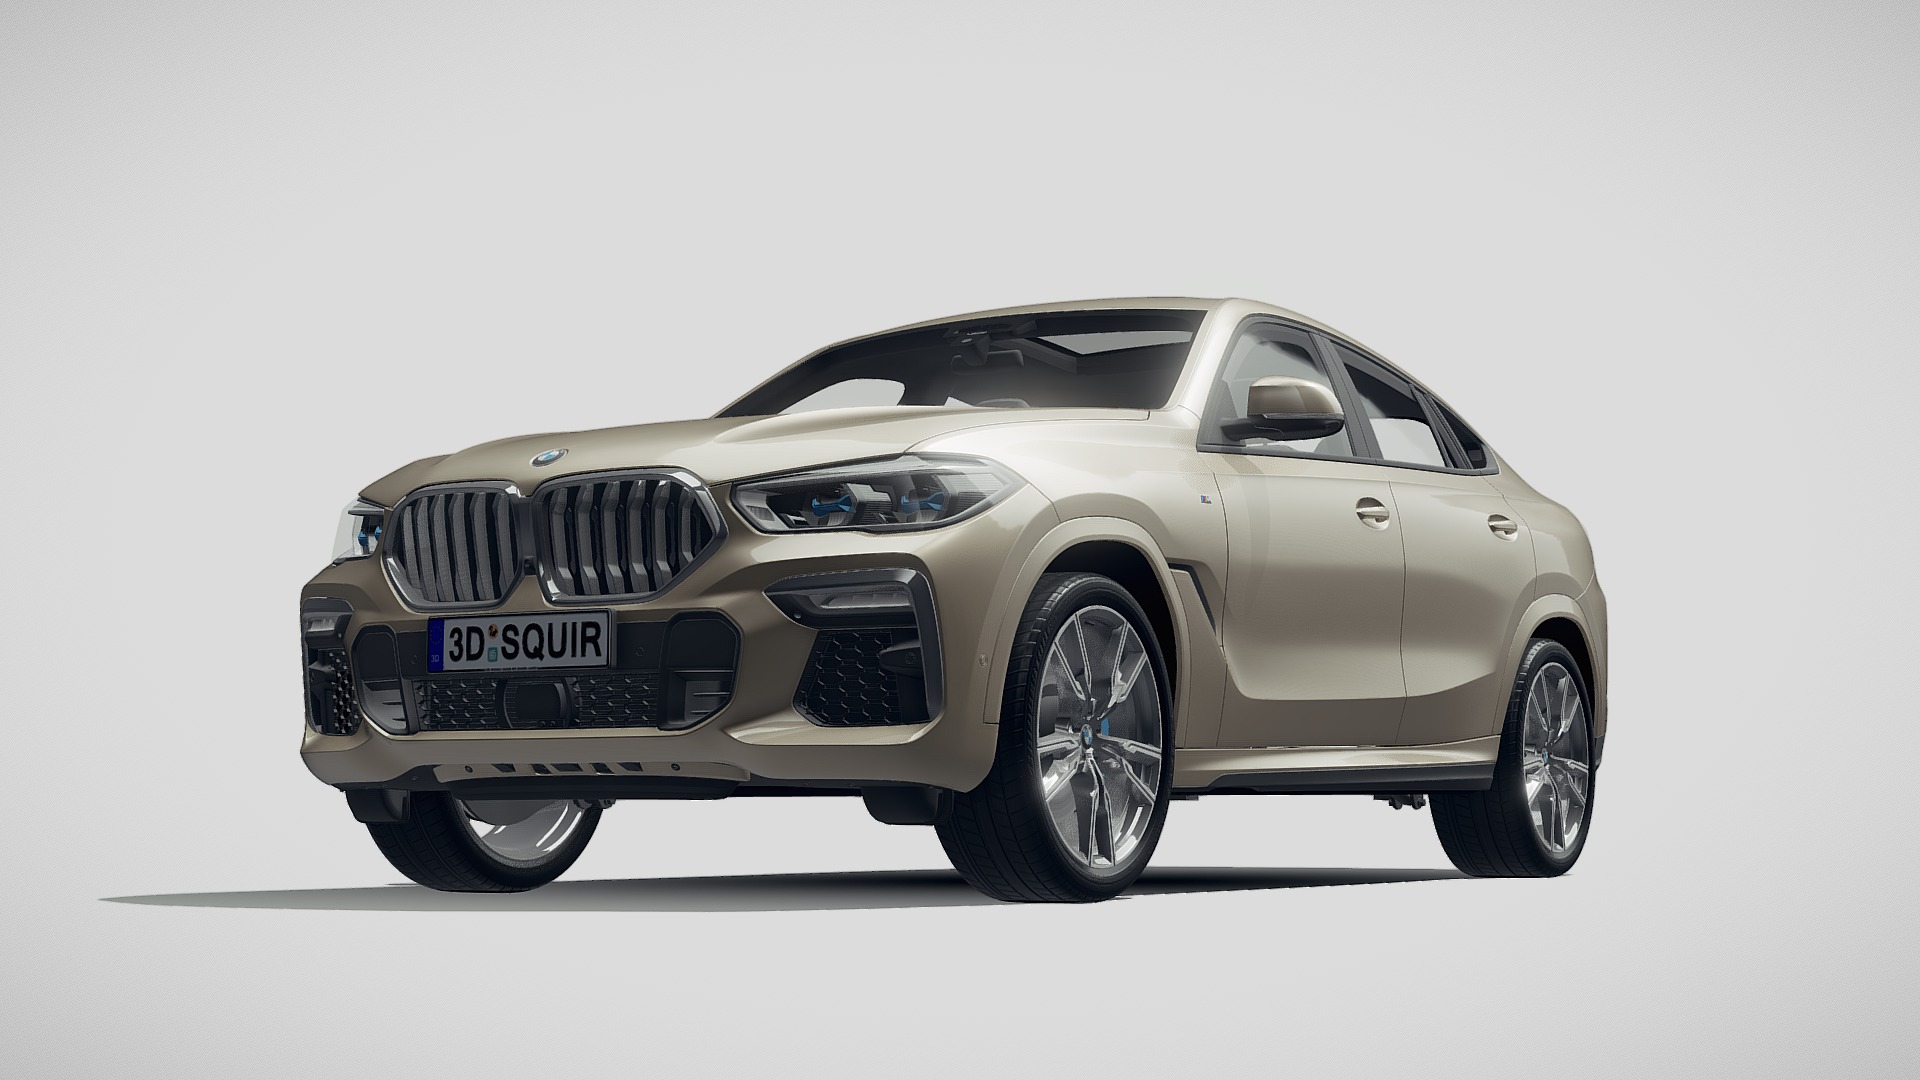 3D model BMW X6 M50i 2020 - This is a 3D model of the BMW X6 M50i 2020. The 3D model is about a silver car with a black grill.